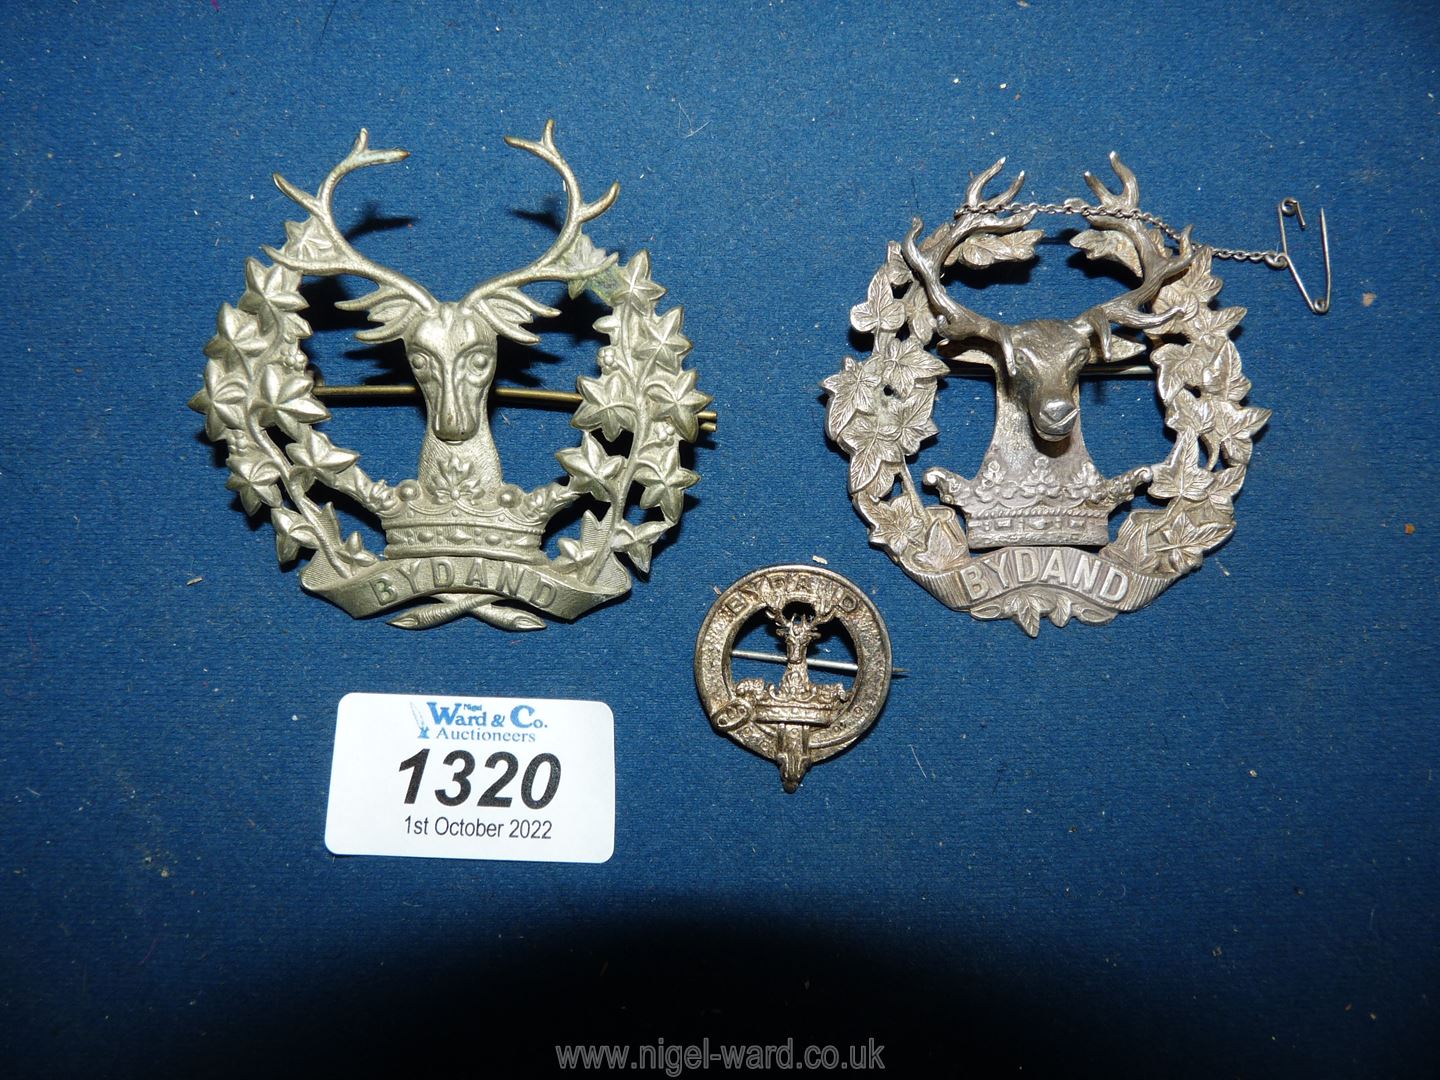 A Gordon Highlanders 'Bydand' badge, British Army military badge, plus two other similar badges.